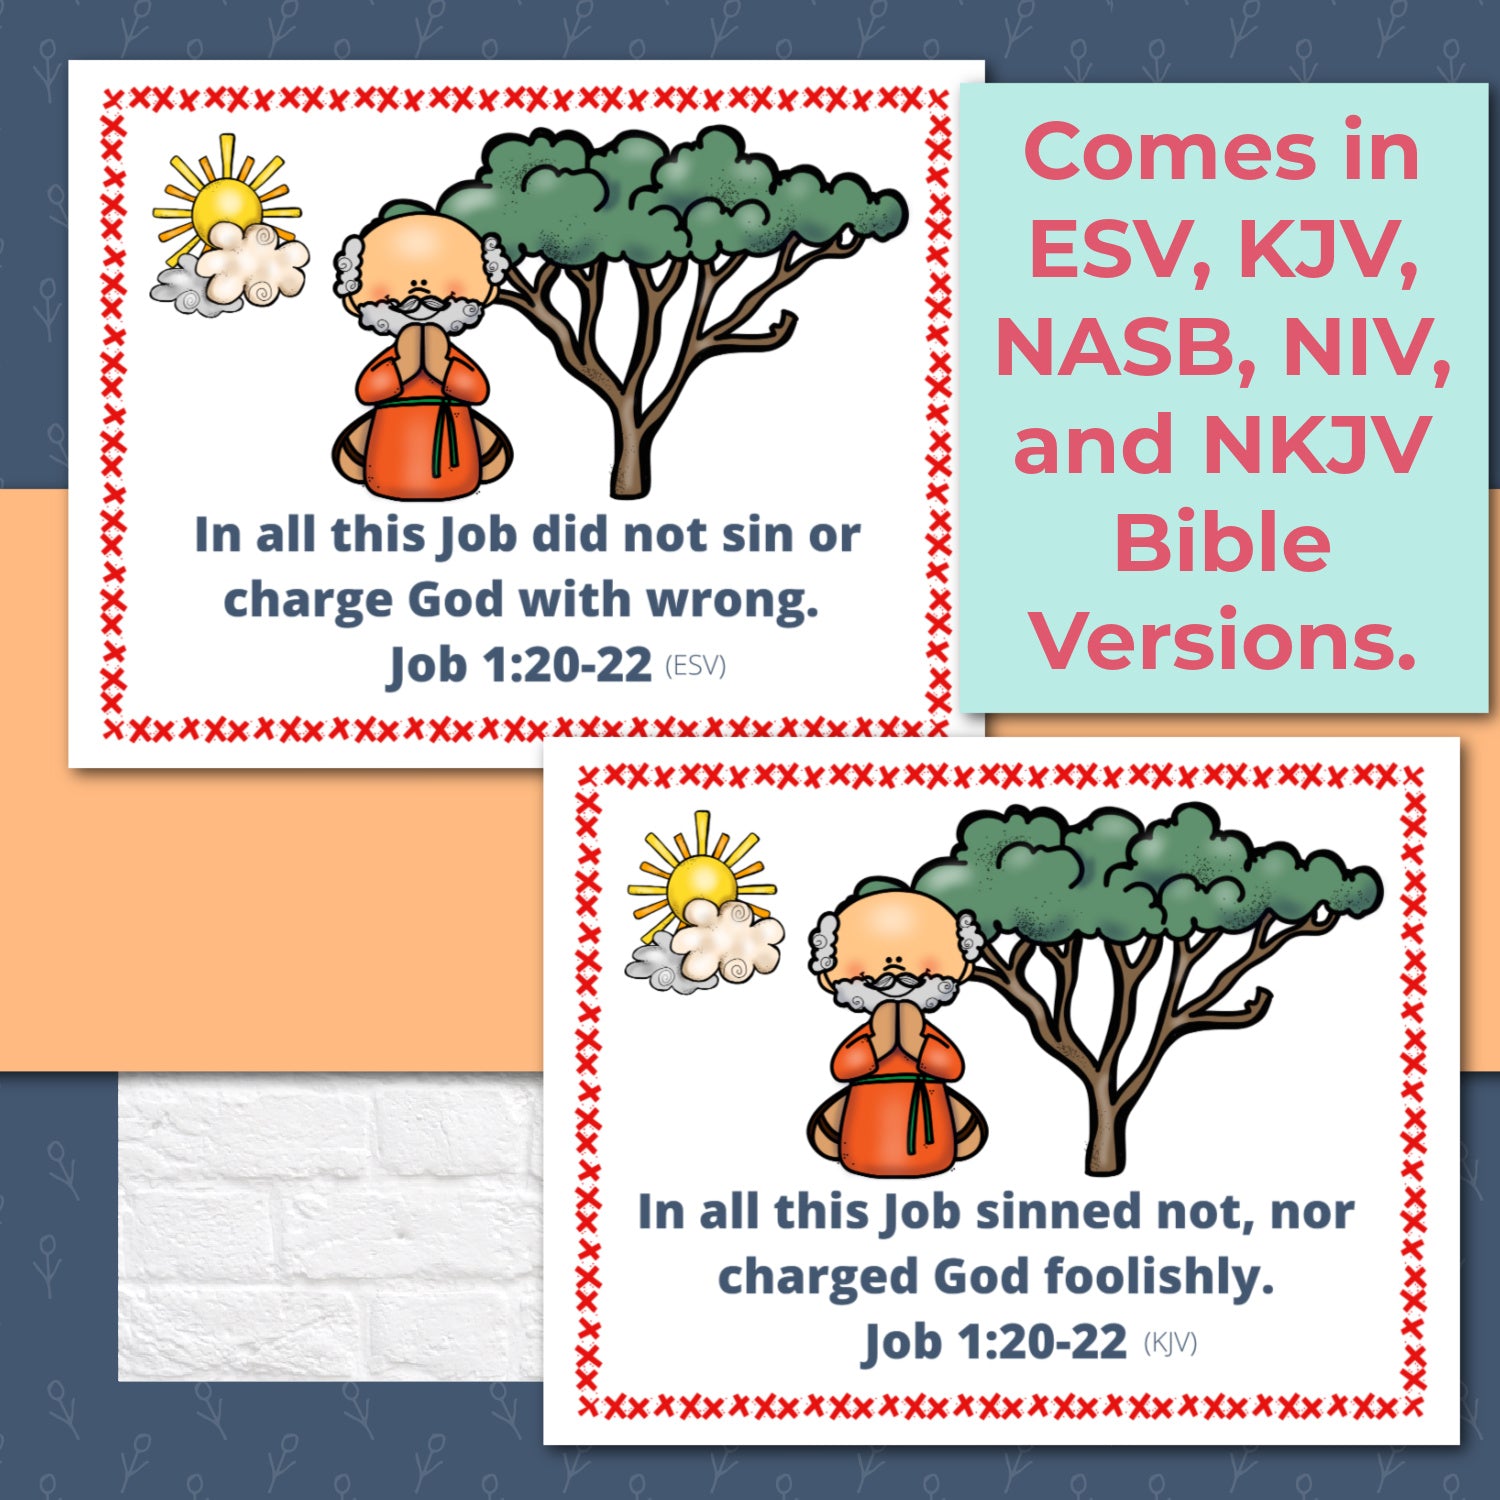 Job Bible Story Teaching Posters and Mini Cards